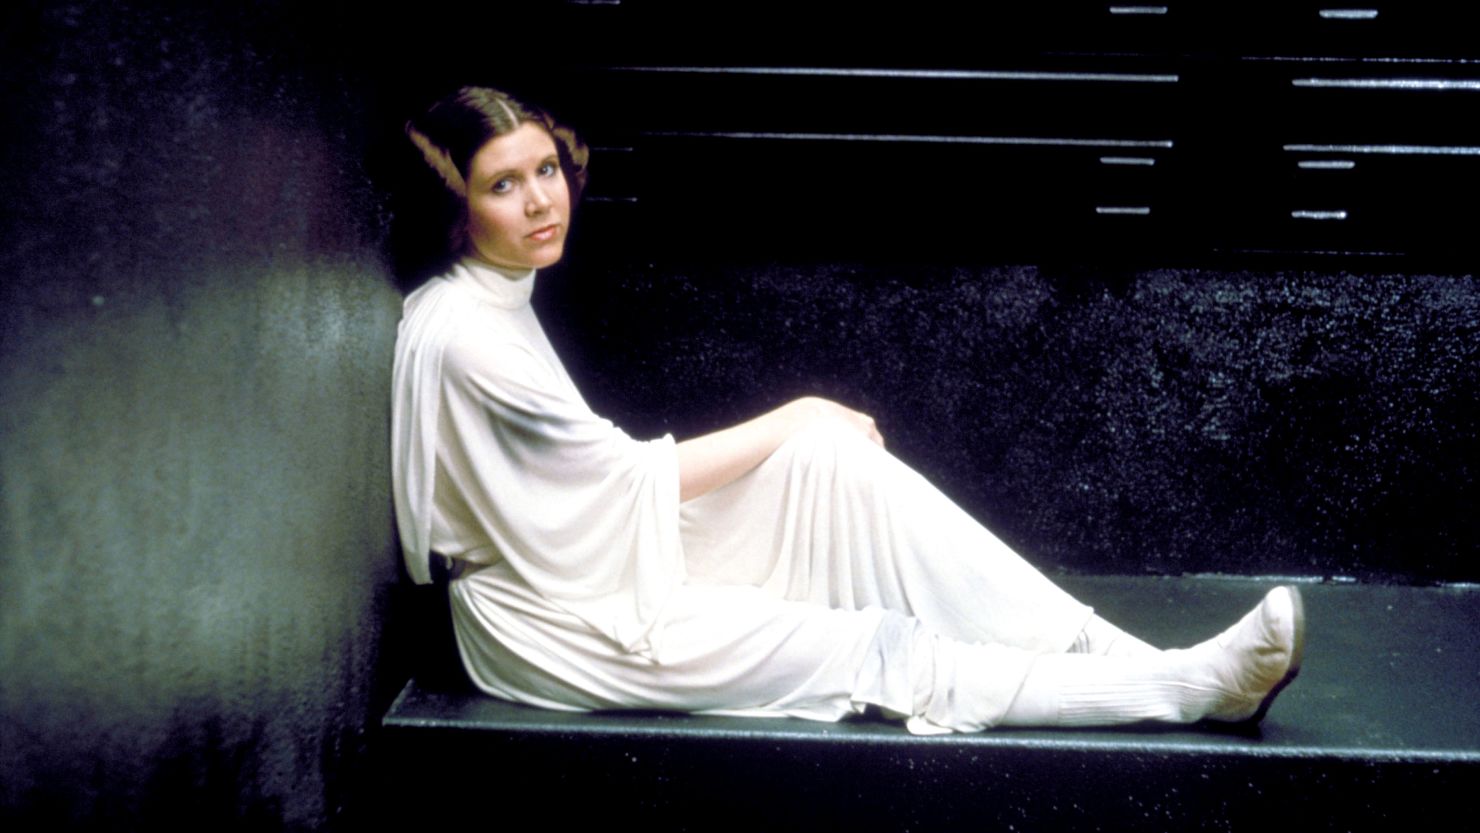 Carrie Fisher as Princess Leia in 1977's 'Star Wars Episode IV: A New Hope.'